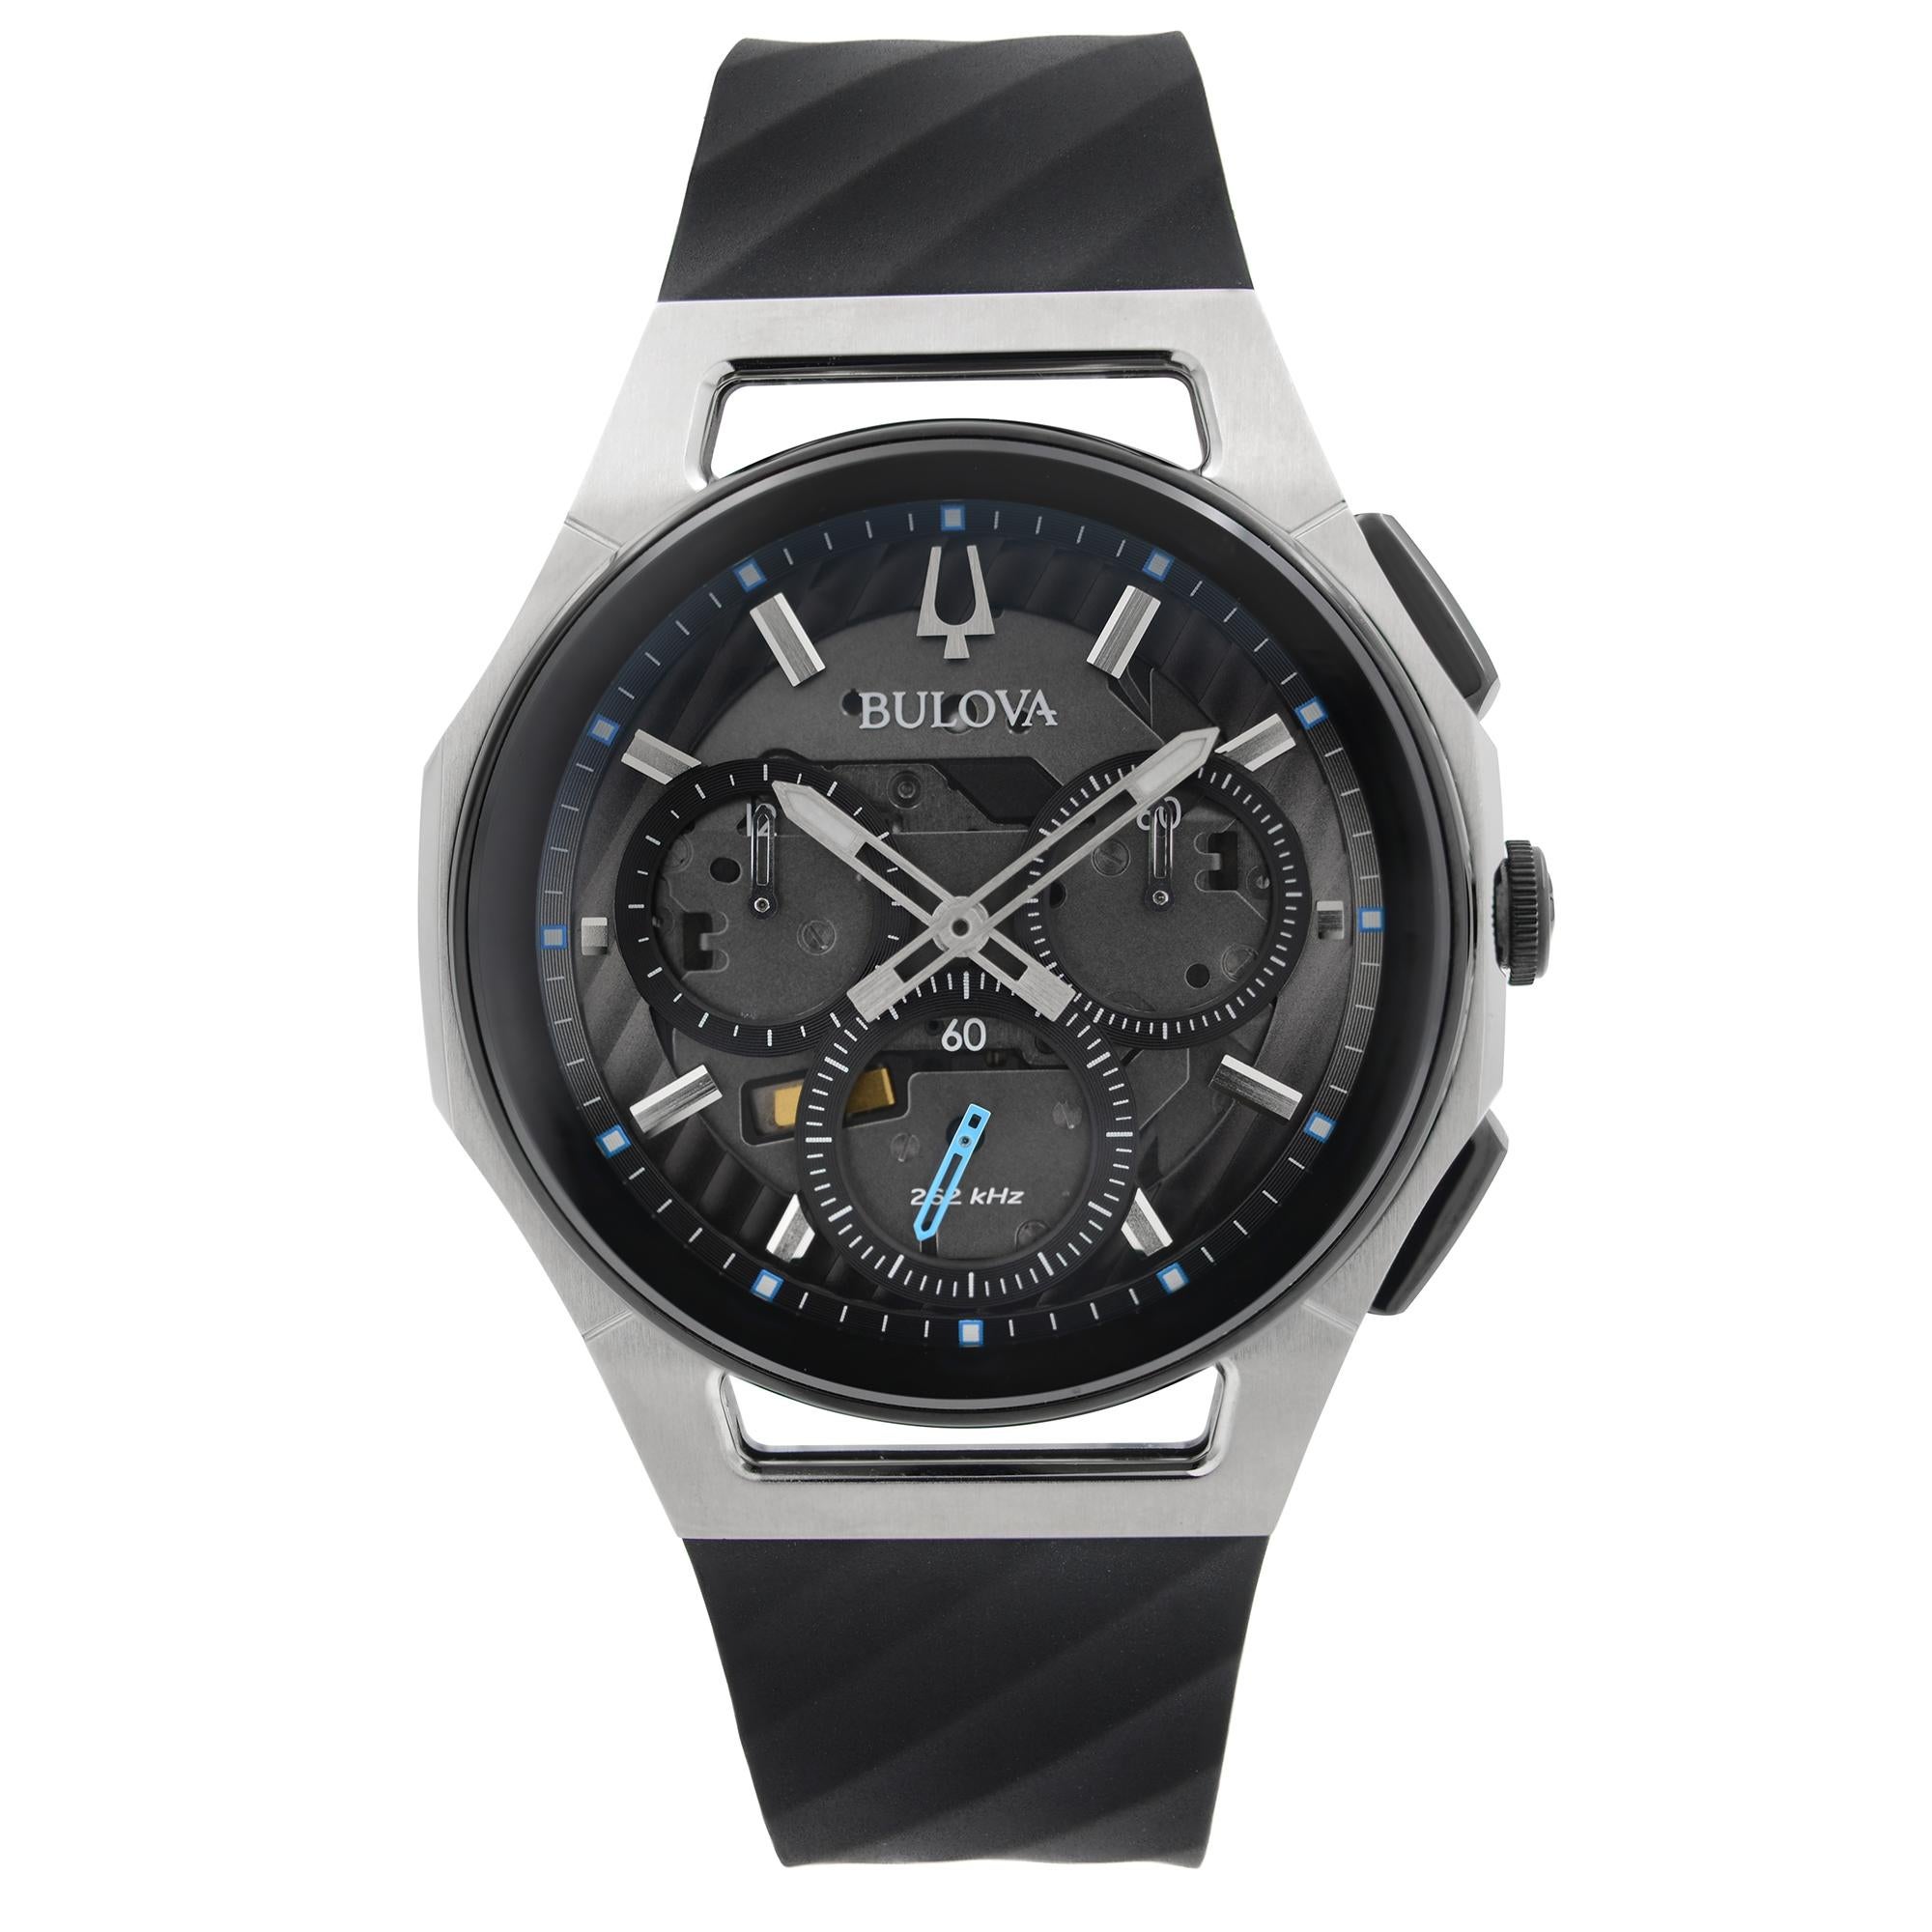 Unworn Bulova Curv 44mm Chronograph Stainless Steel Gray Dial Quartz Men's Watch 98A161. This Beautiful Timepiece Features: Stainless Steel Case with a Black Rubber Strap. Fixed Black Bezel. Dark Grey Dial with Luminous Silver-Tone Hands, And Index